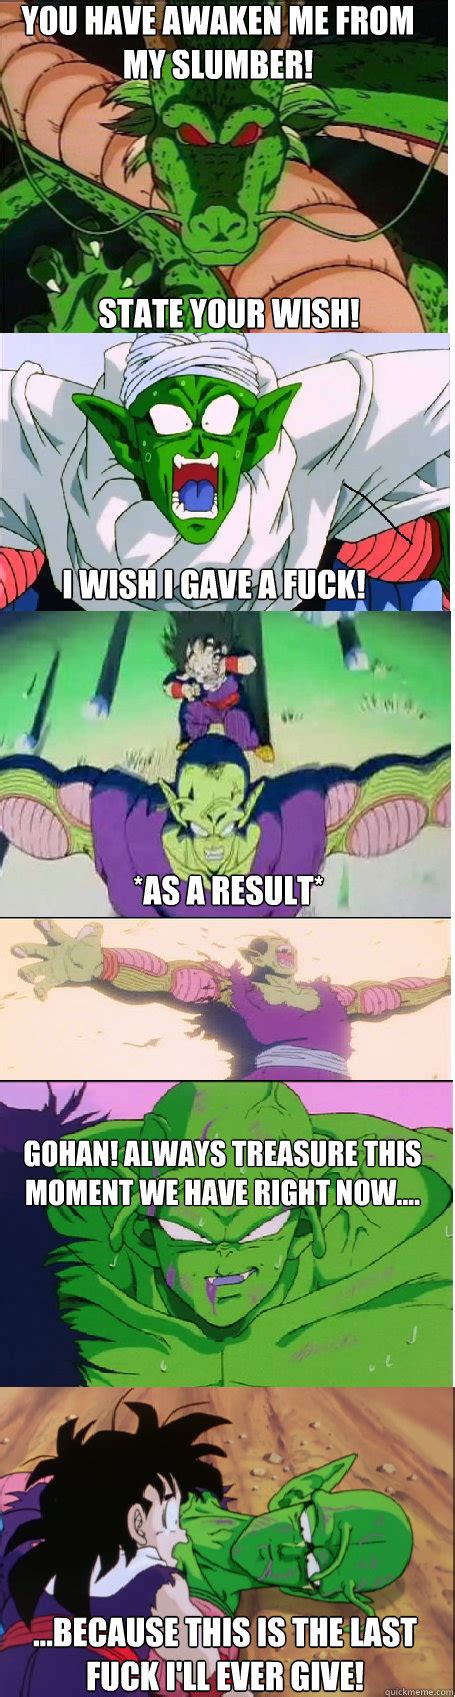 Lady procrastination, at your service. Image result for piccolo meme | Memes, Piccolo, In this moment